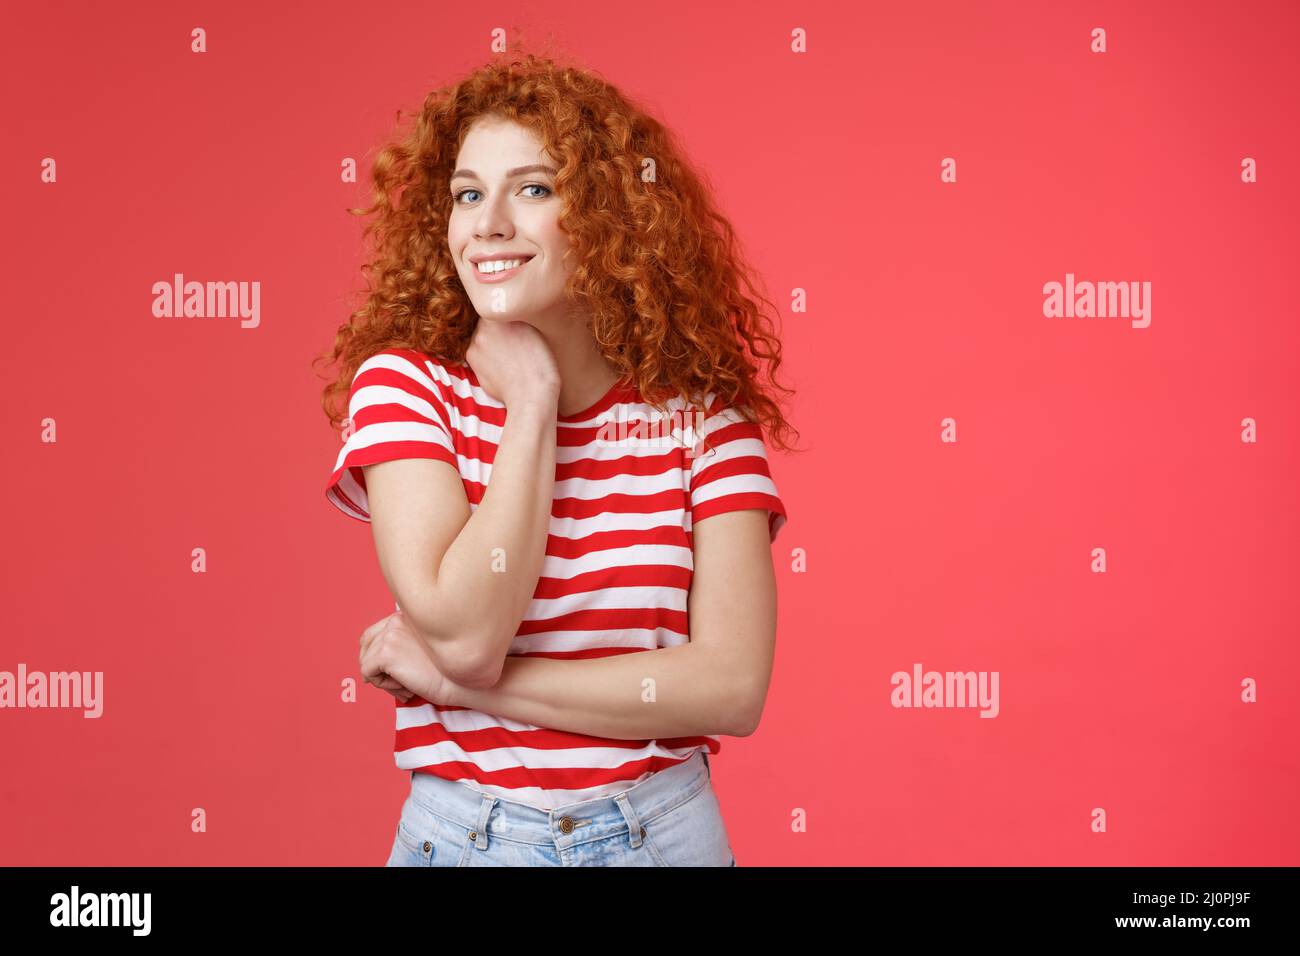 Cheerful lively cute tender redhead curly girl romantic summer mood pondering what present girlfriend happy pride month silly sm Stock Photo